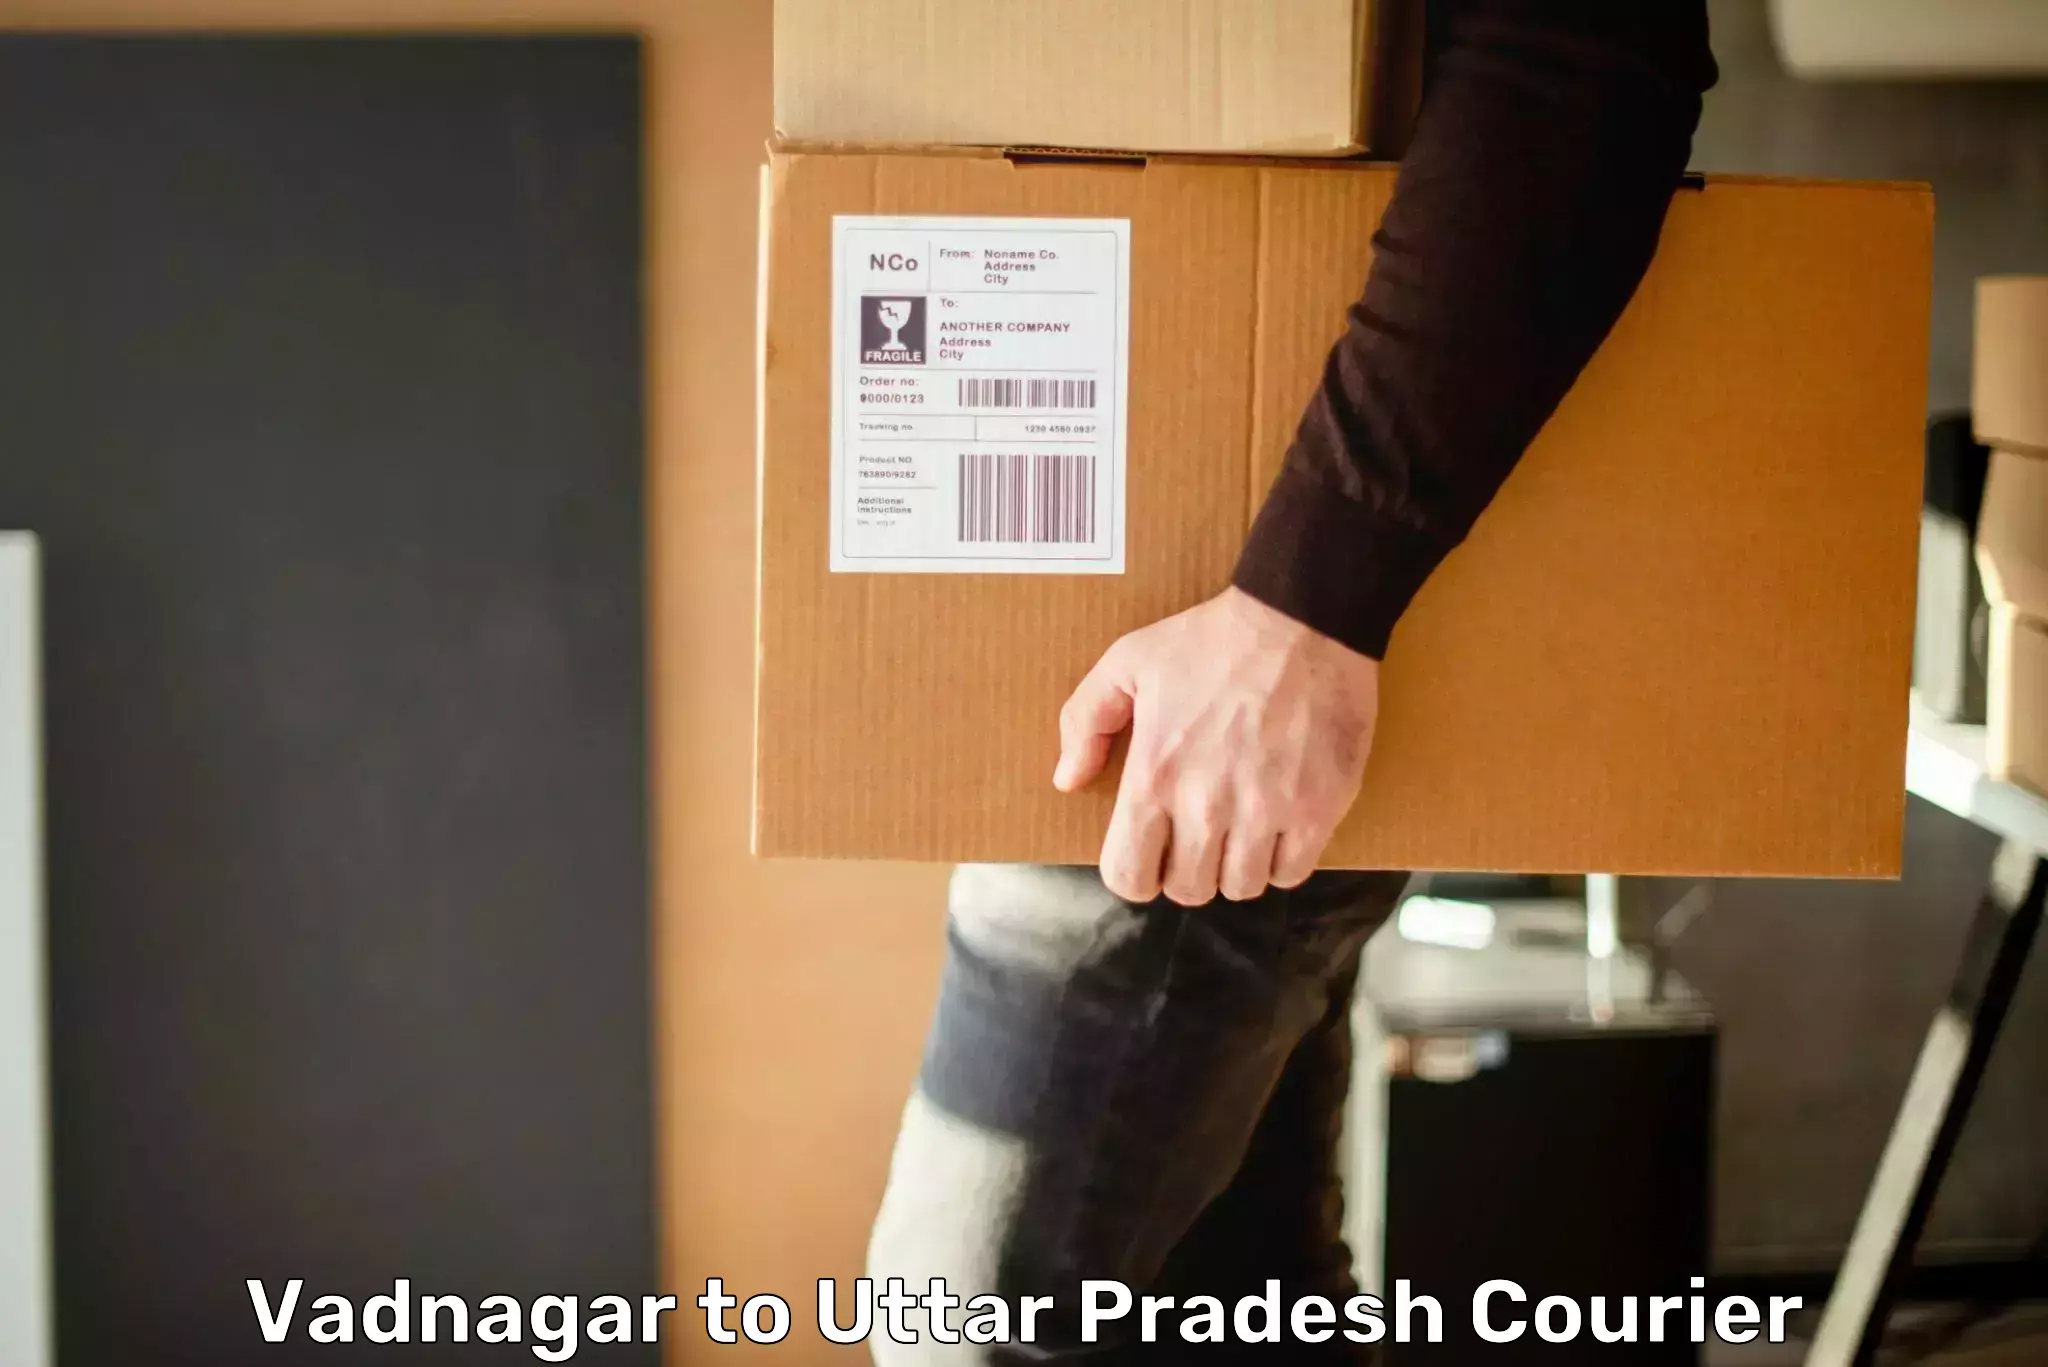 Dynamic courier operations Vadnagar to Unchahar